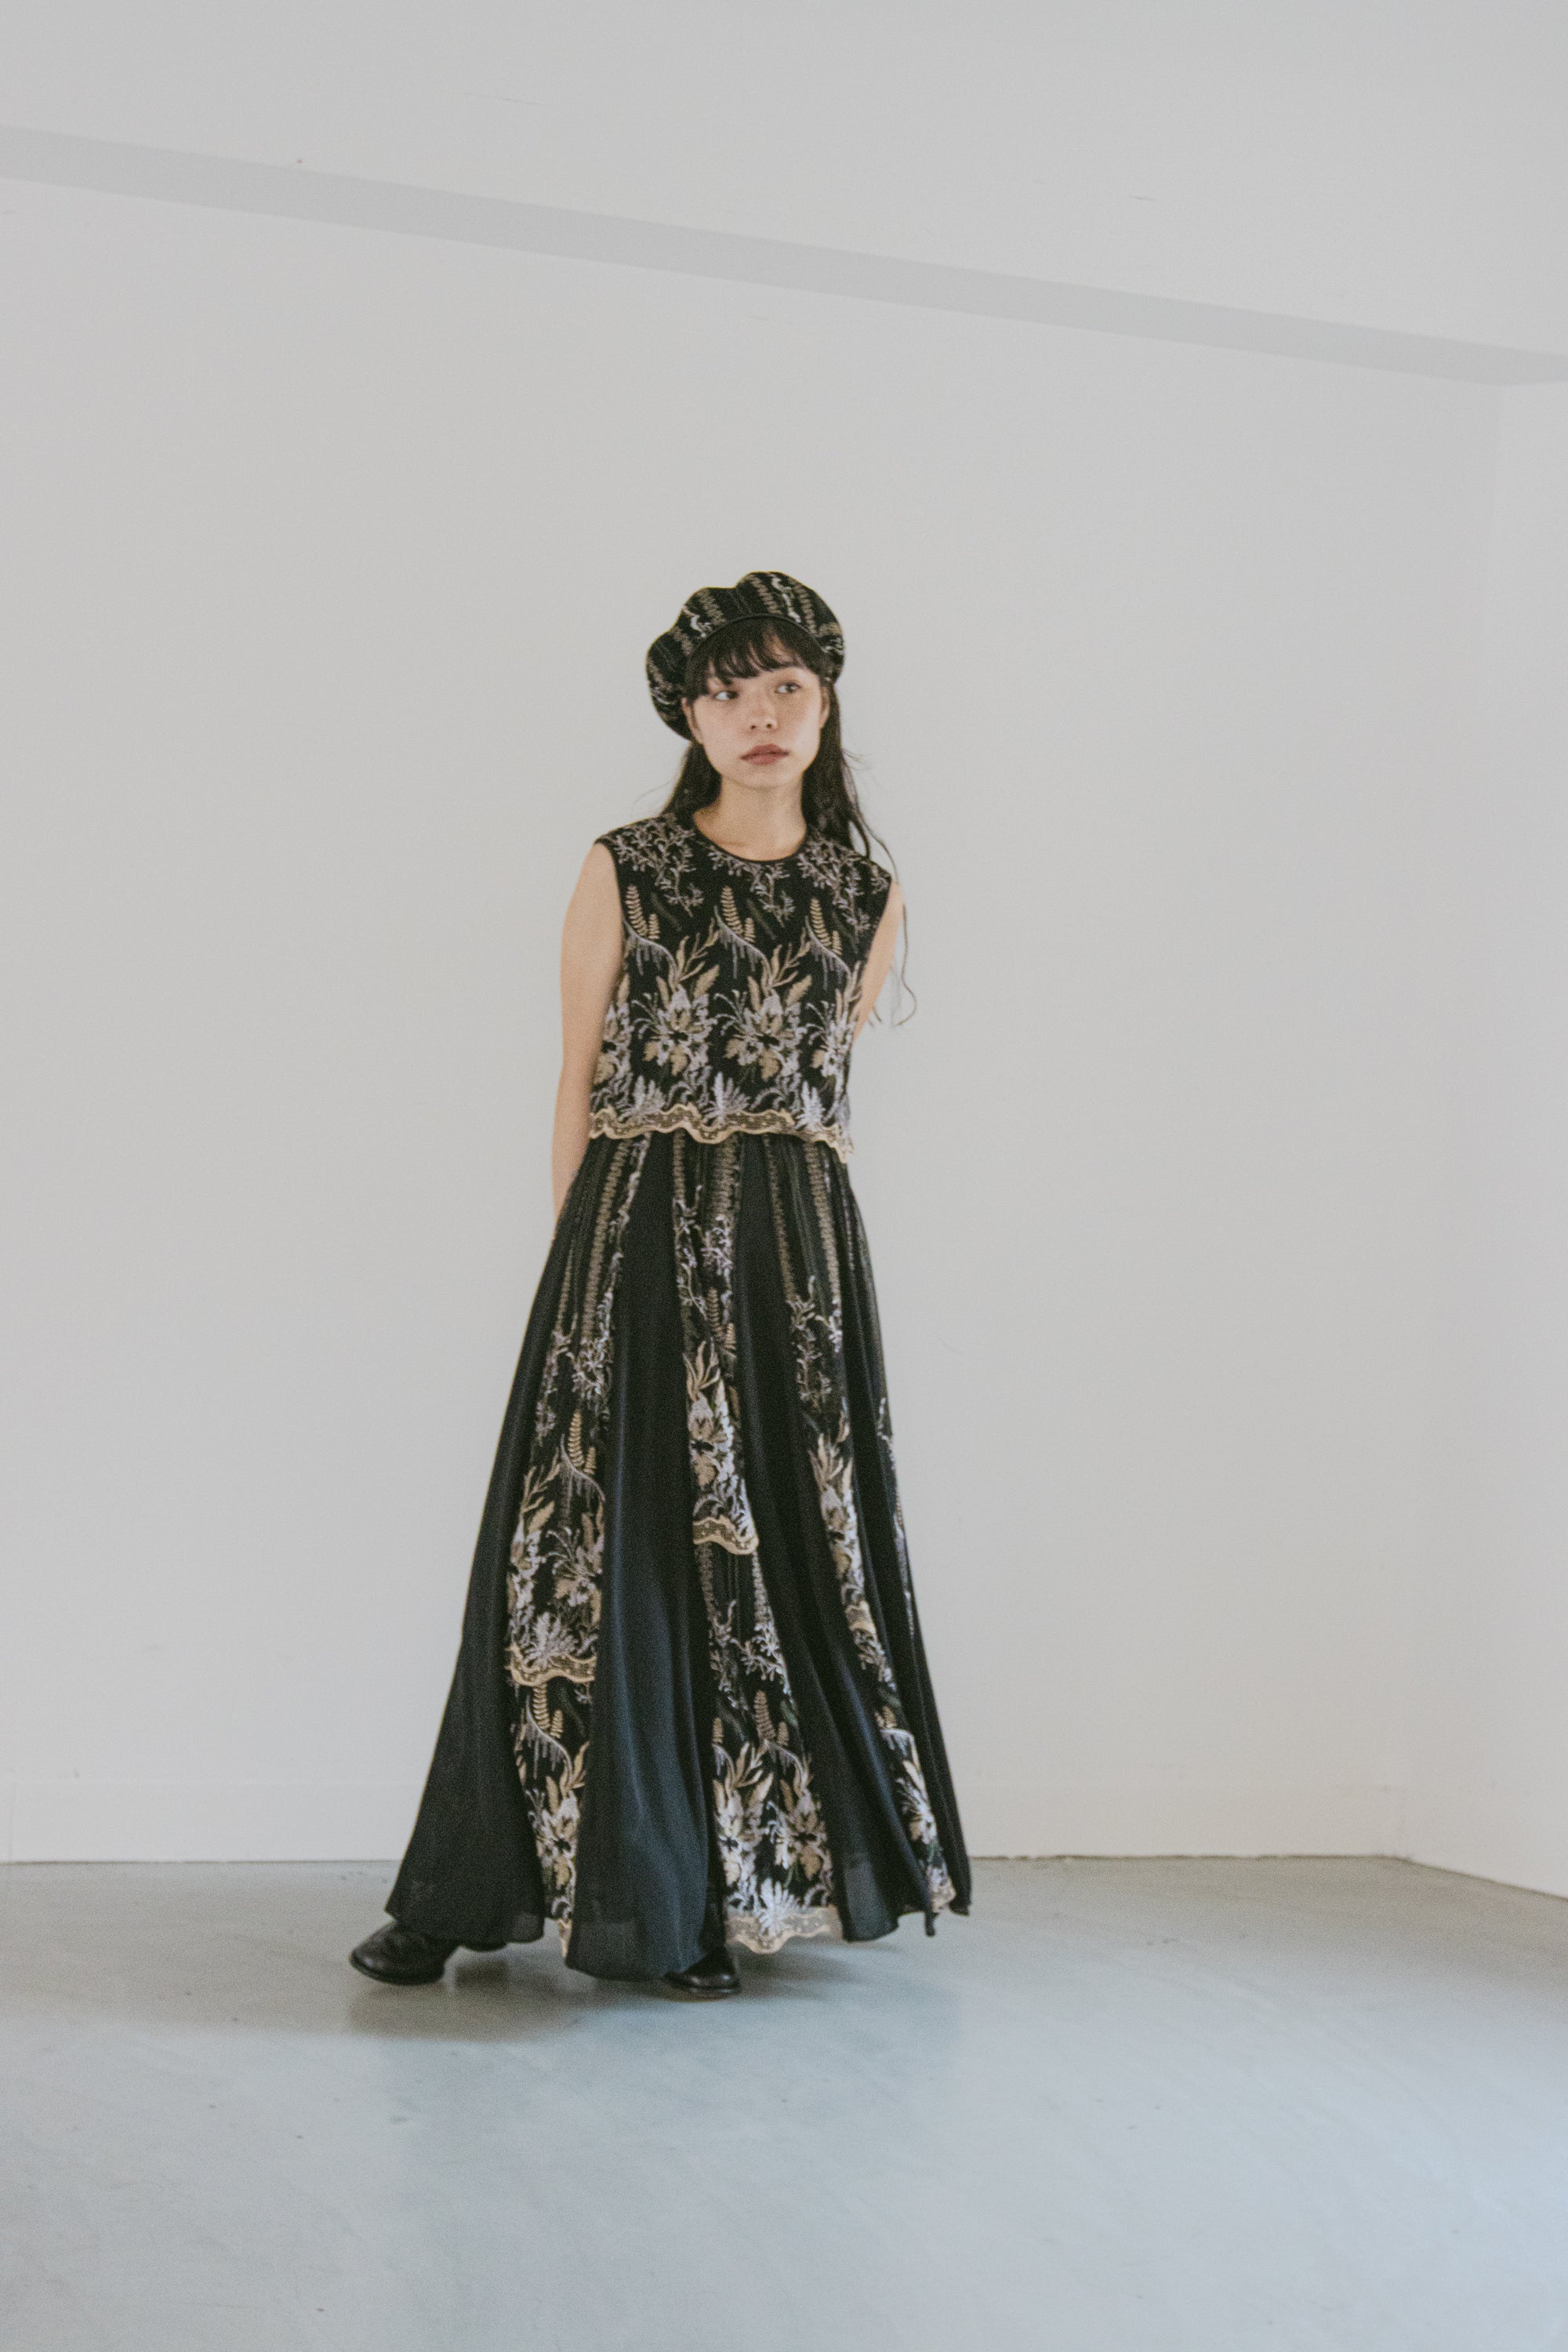 MURRAL Snow flower lace dress (Ice gray)